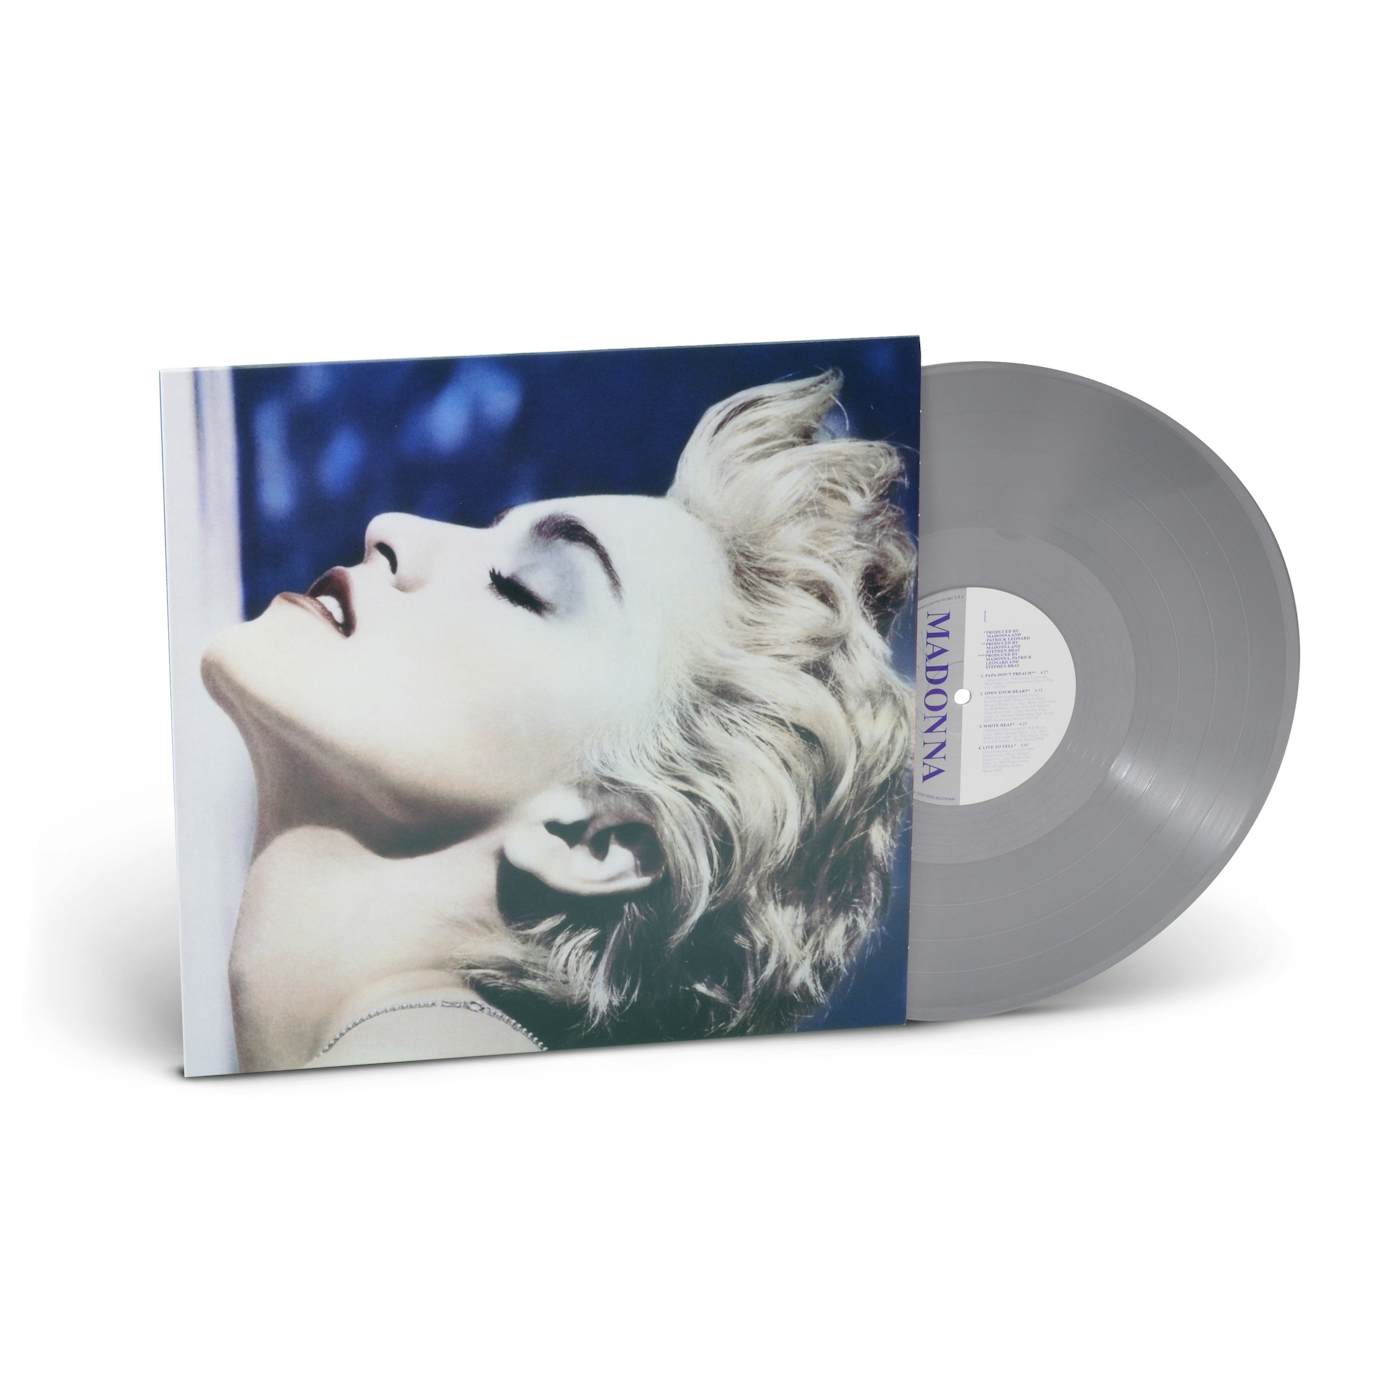 Madonna True Blue – “The Silver Collection” Vinyl